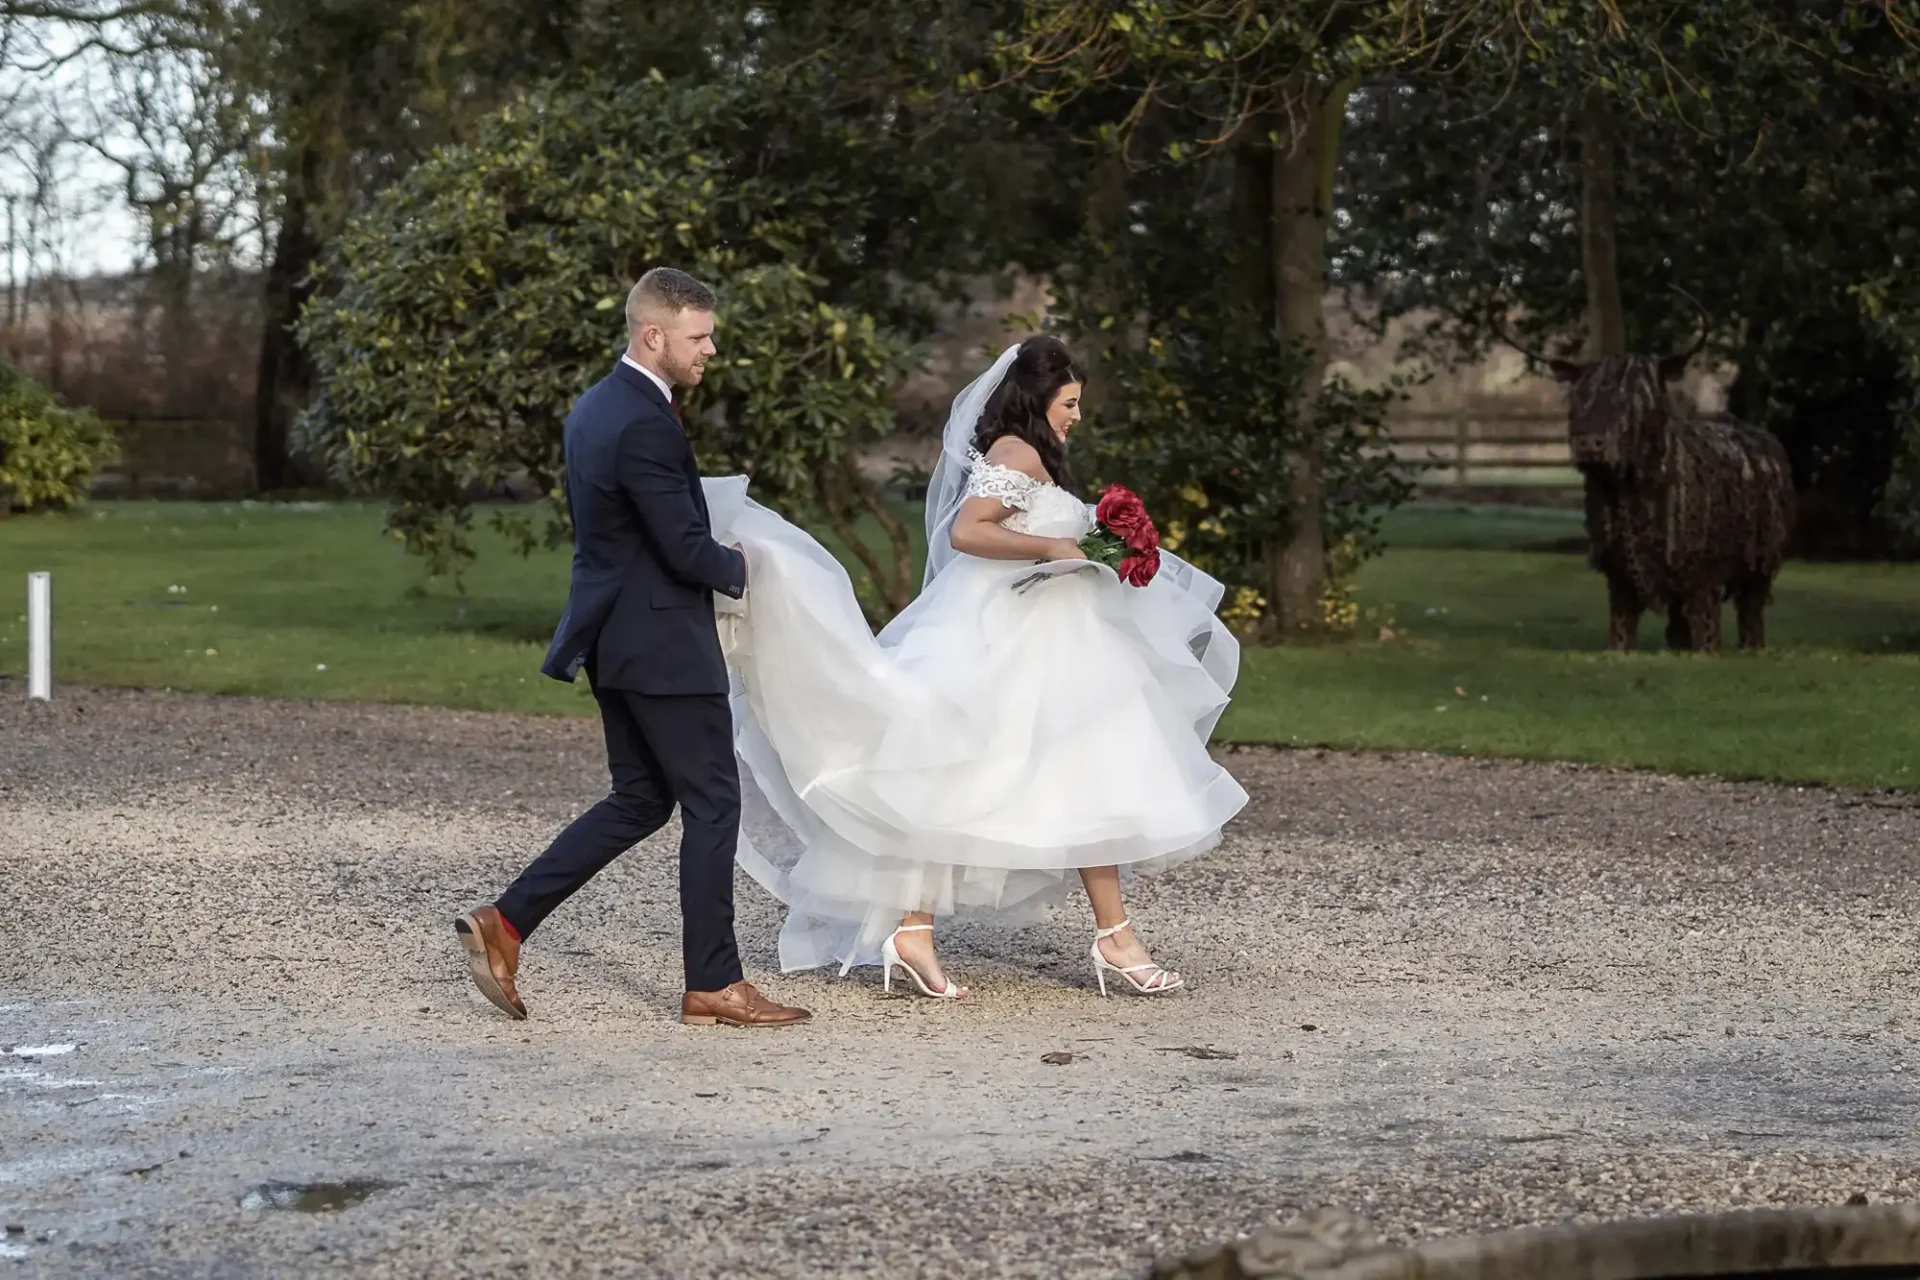 A bride and groom walk hand in hand across a gravel path, the bride holding up her white dress, both dressed formally.